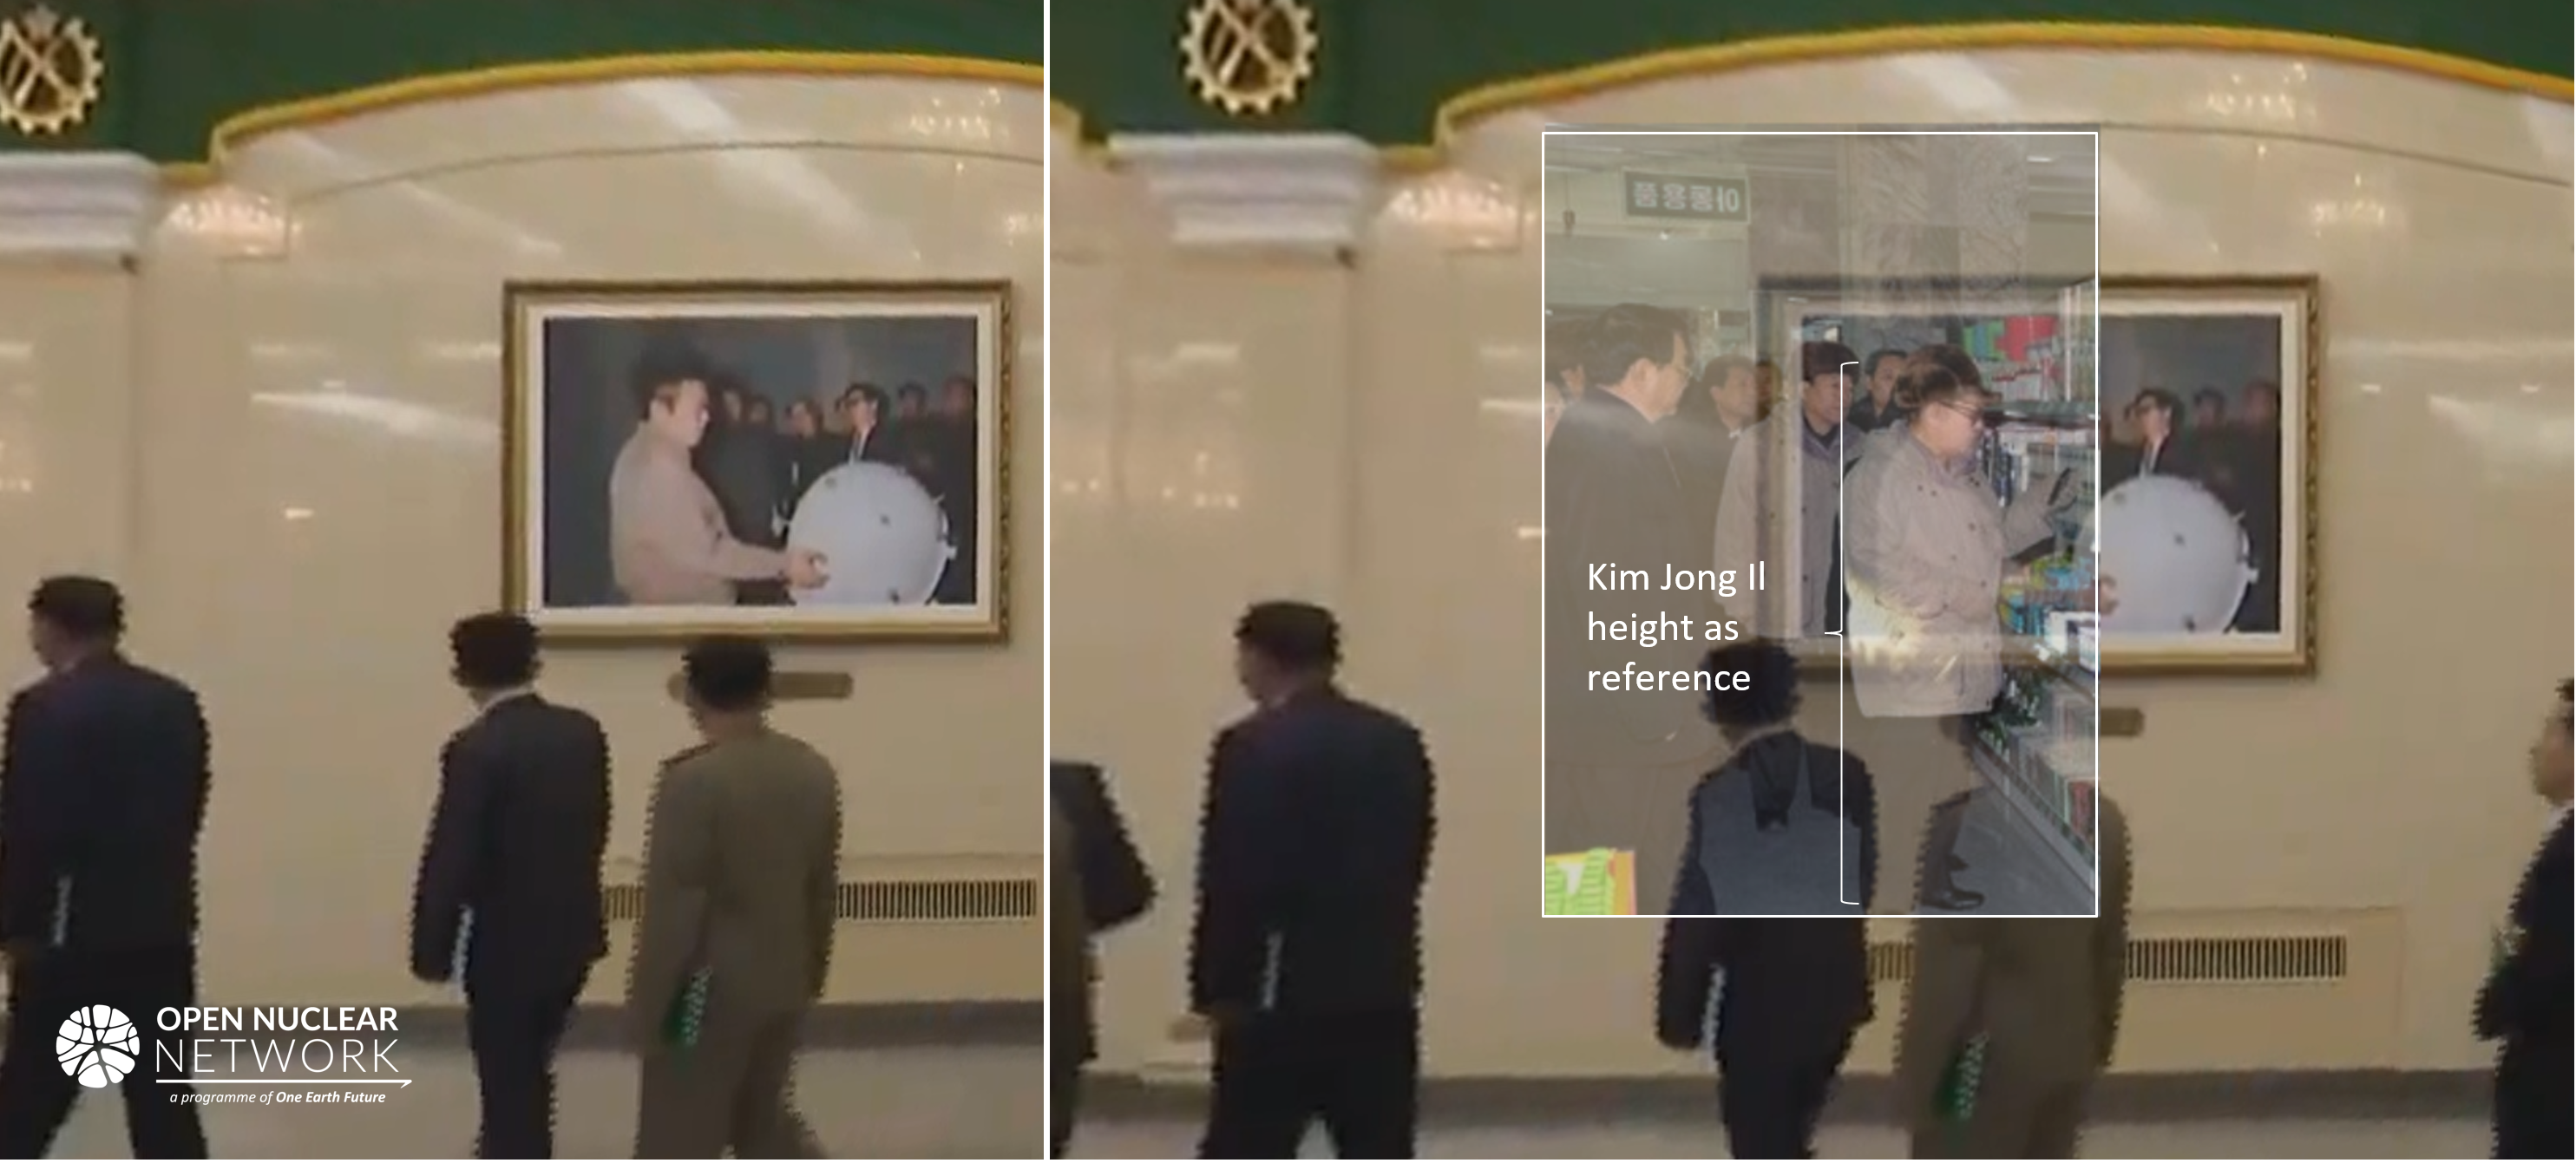 Figure 3. Left: Kim Jong Il inspecting a spherical object processed with Photoshop’s perspective warp in order to show a better view. Right: Another photo of Kim Jong Il, full-body height, overlaid on the original photo as a rough reference, the spherical object has a diameter of roughly ~600 mm. Images: KCTV, Kim Jong Il Looking at things